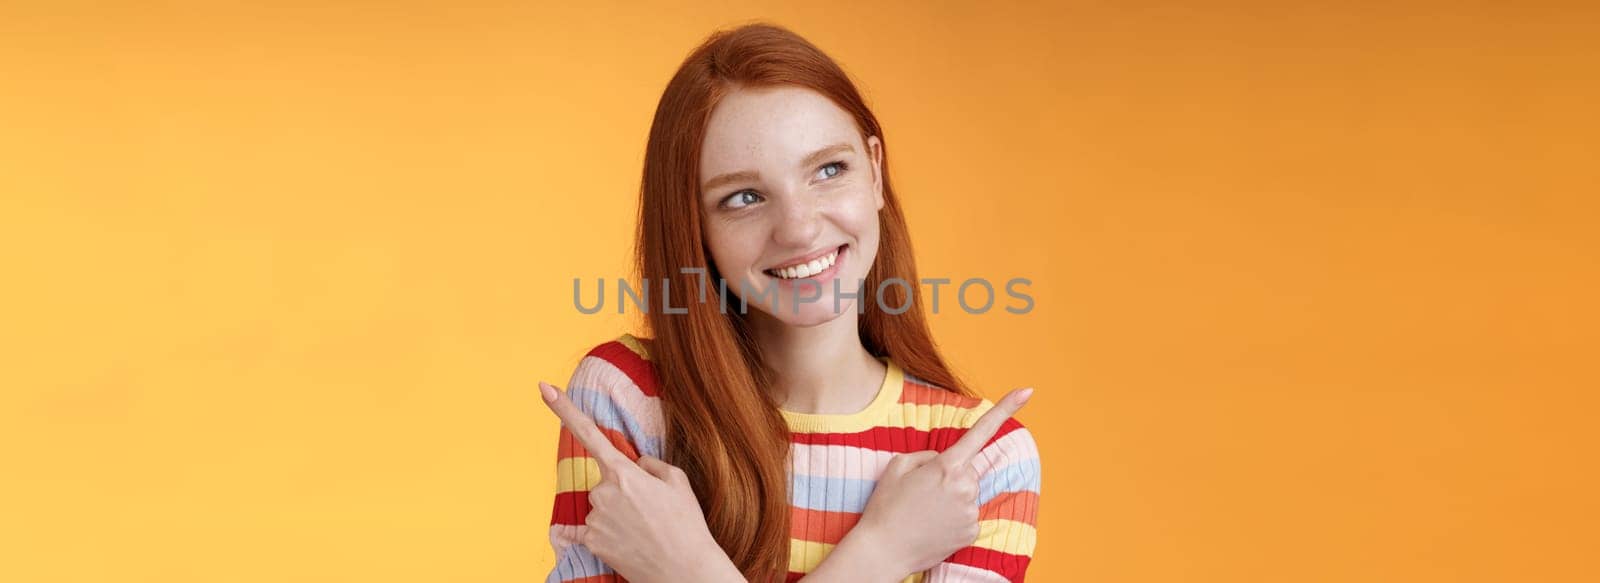 Dreamy cute redhead girl planning were go summer holidays have different choices picking variant look intrigued smiling pleased pointing sideways left right taking decision, orange background.